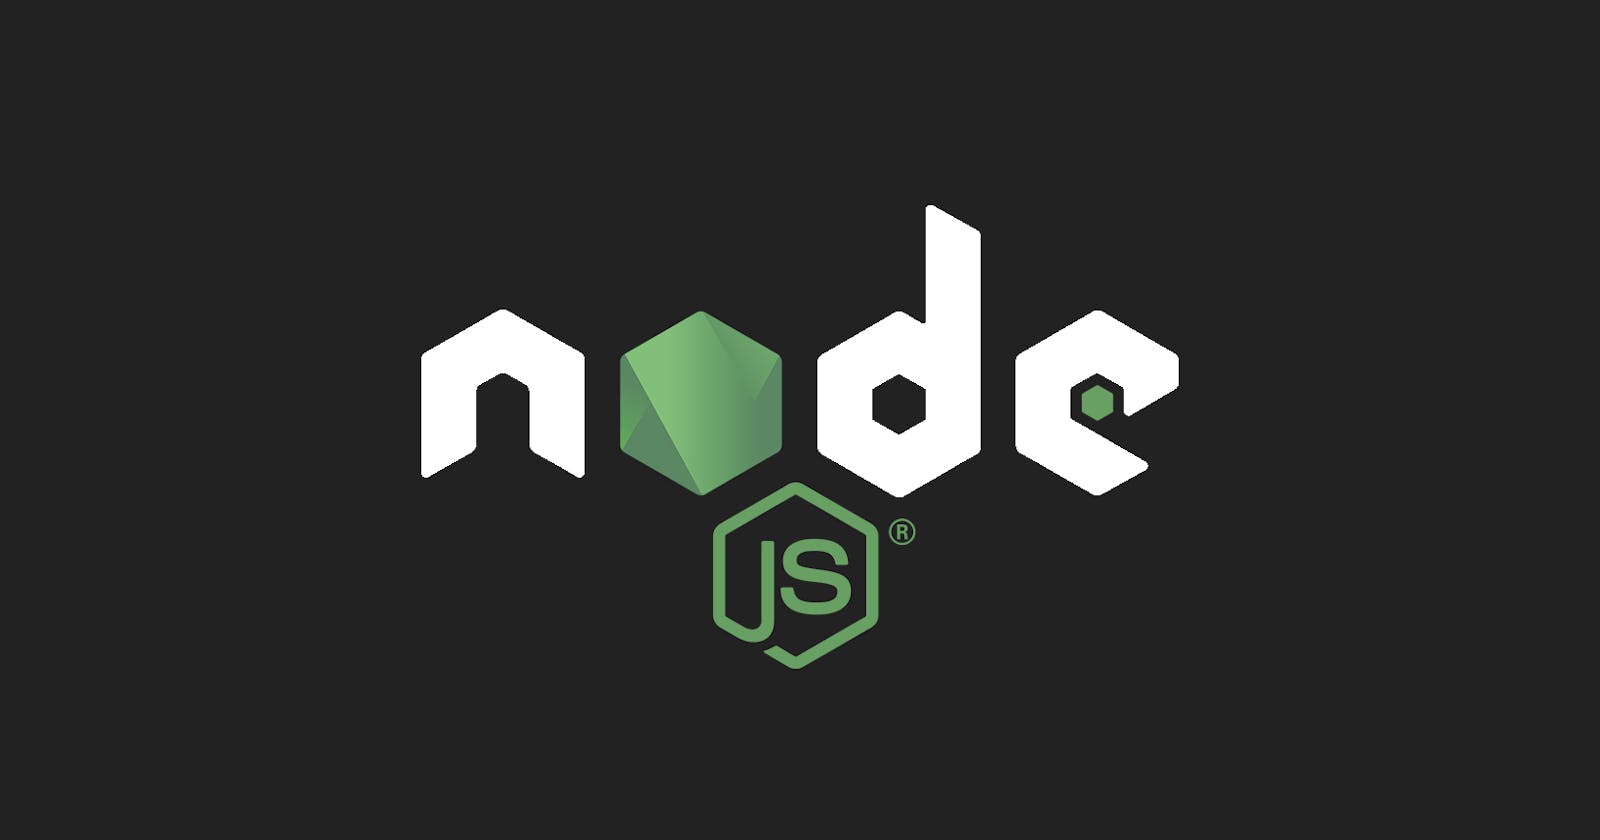 How much JavaScript do you need to know to use Node.js?